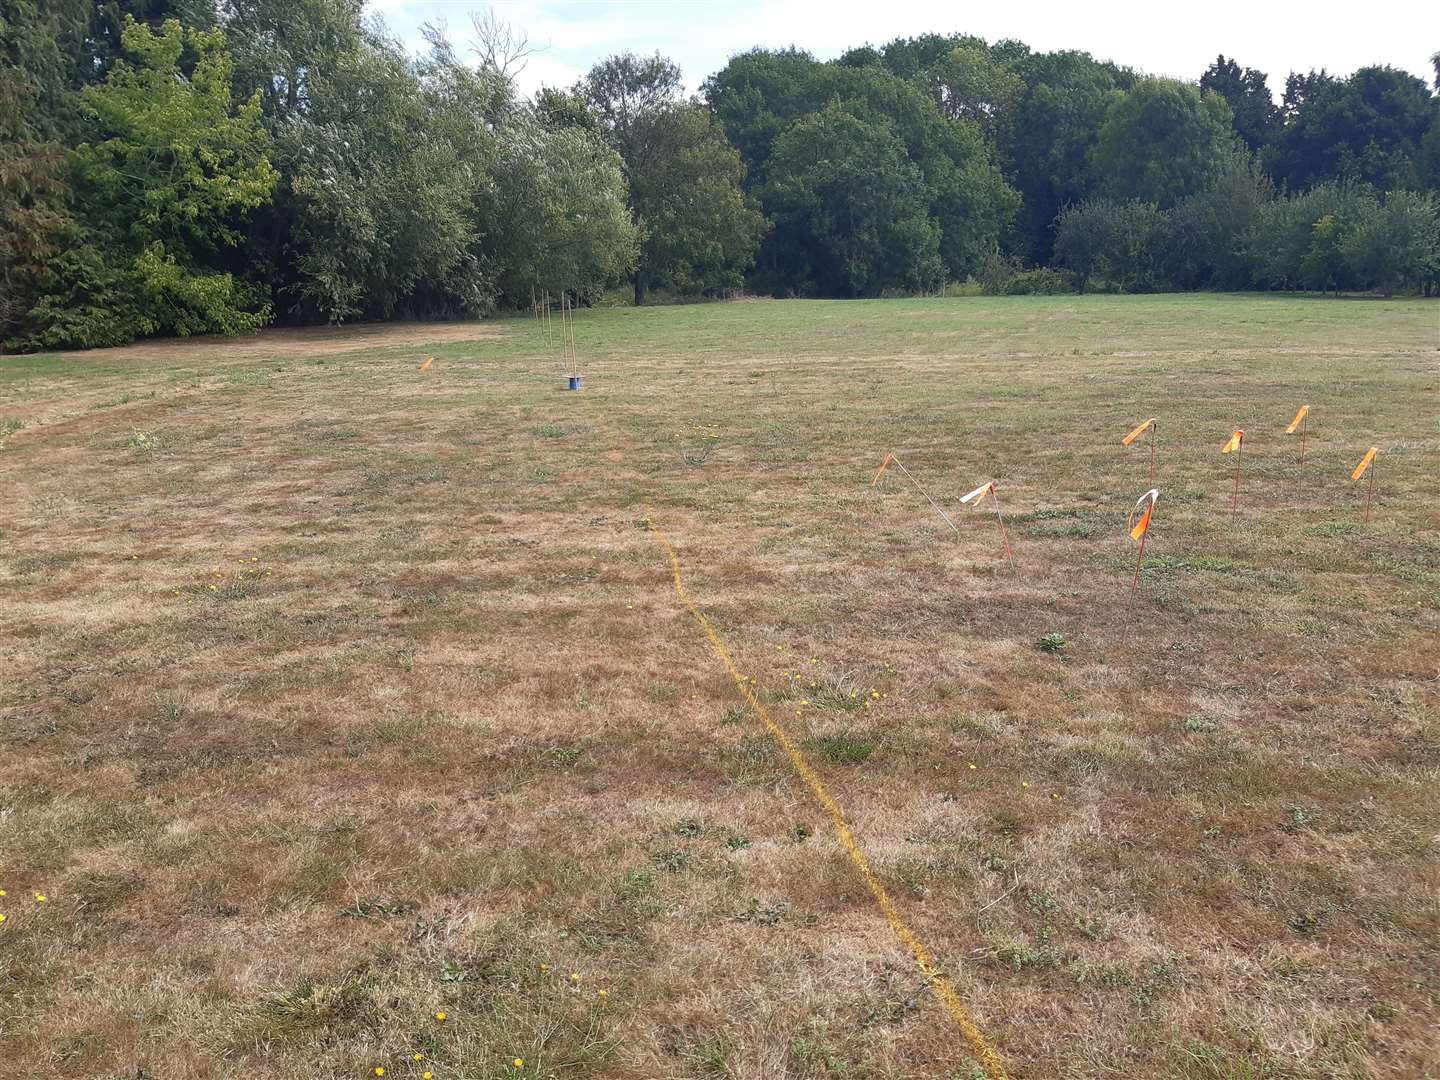 The field in Yalding where a V2 rocket landed in 1944. The flags set out the lines of a planned archaeological dig by Research Resource Archaeology (58417980)